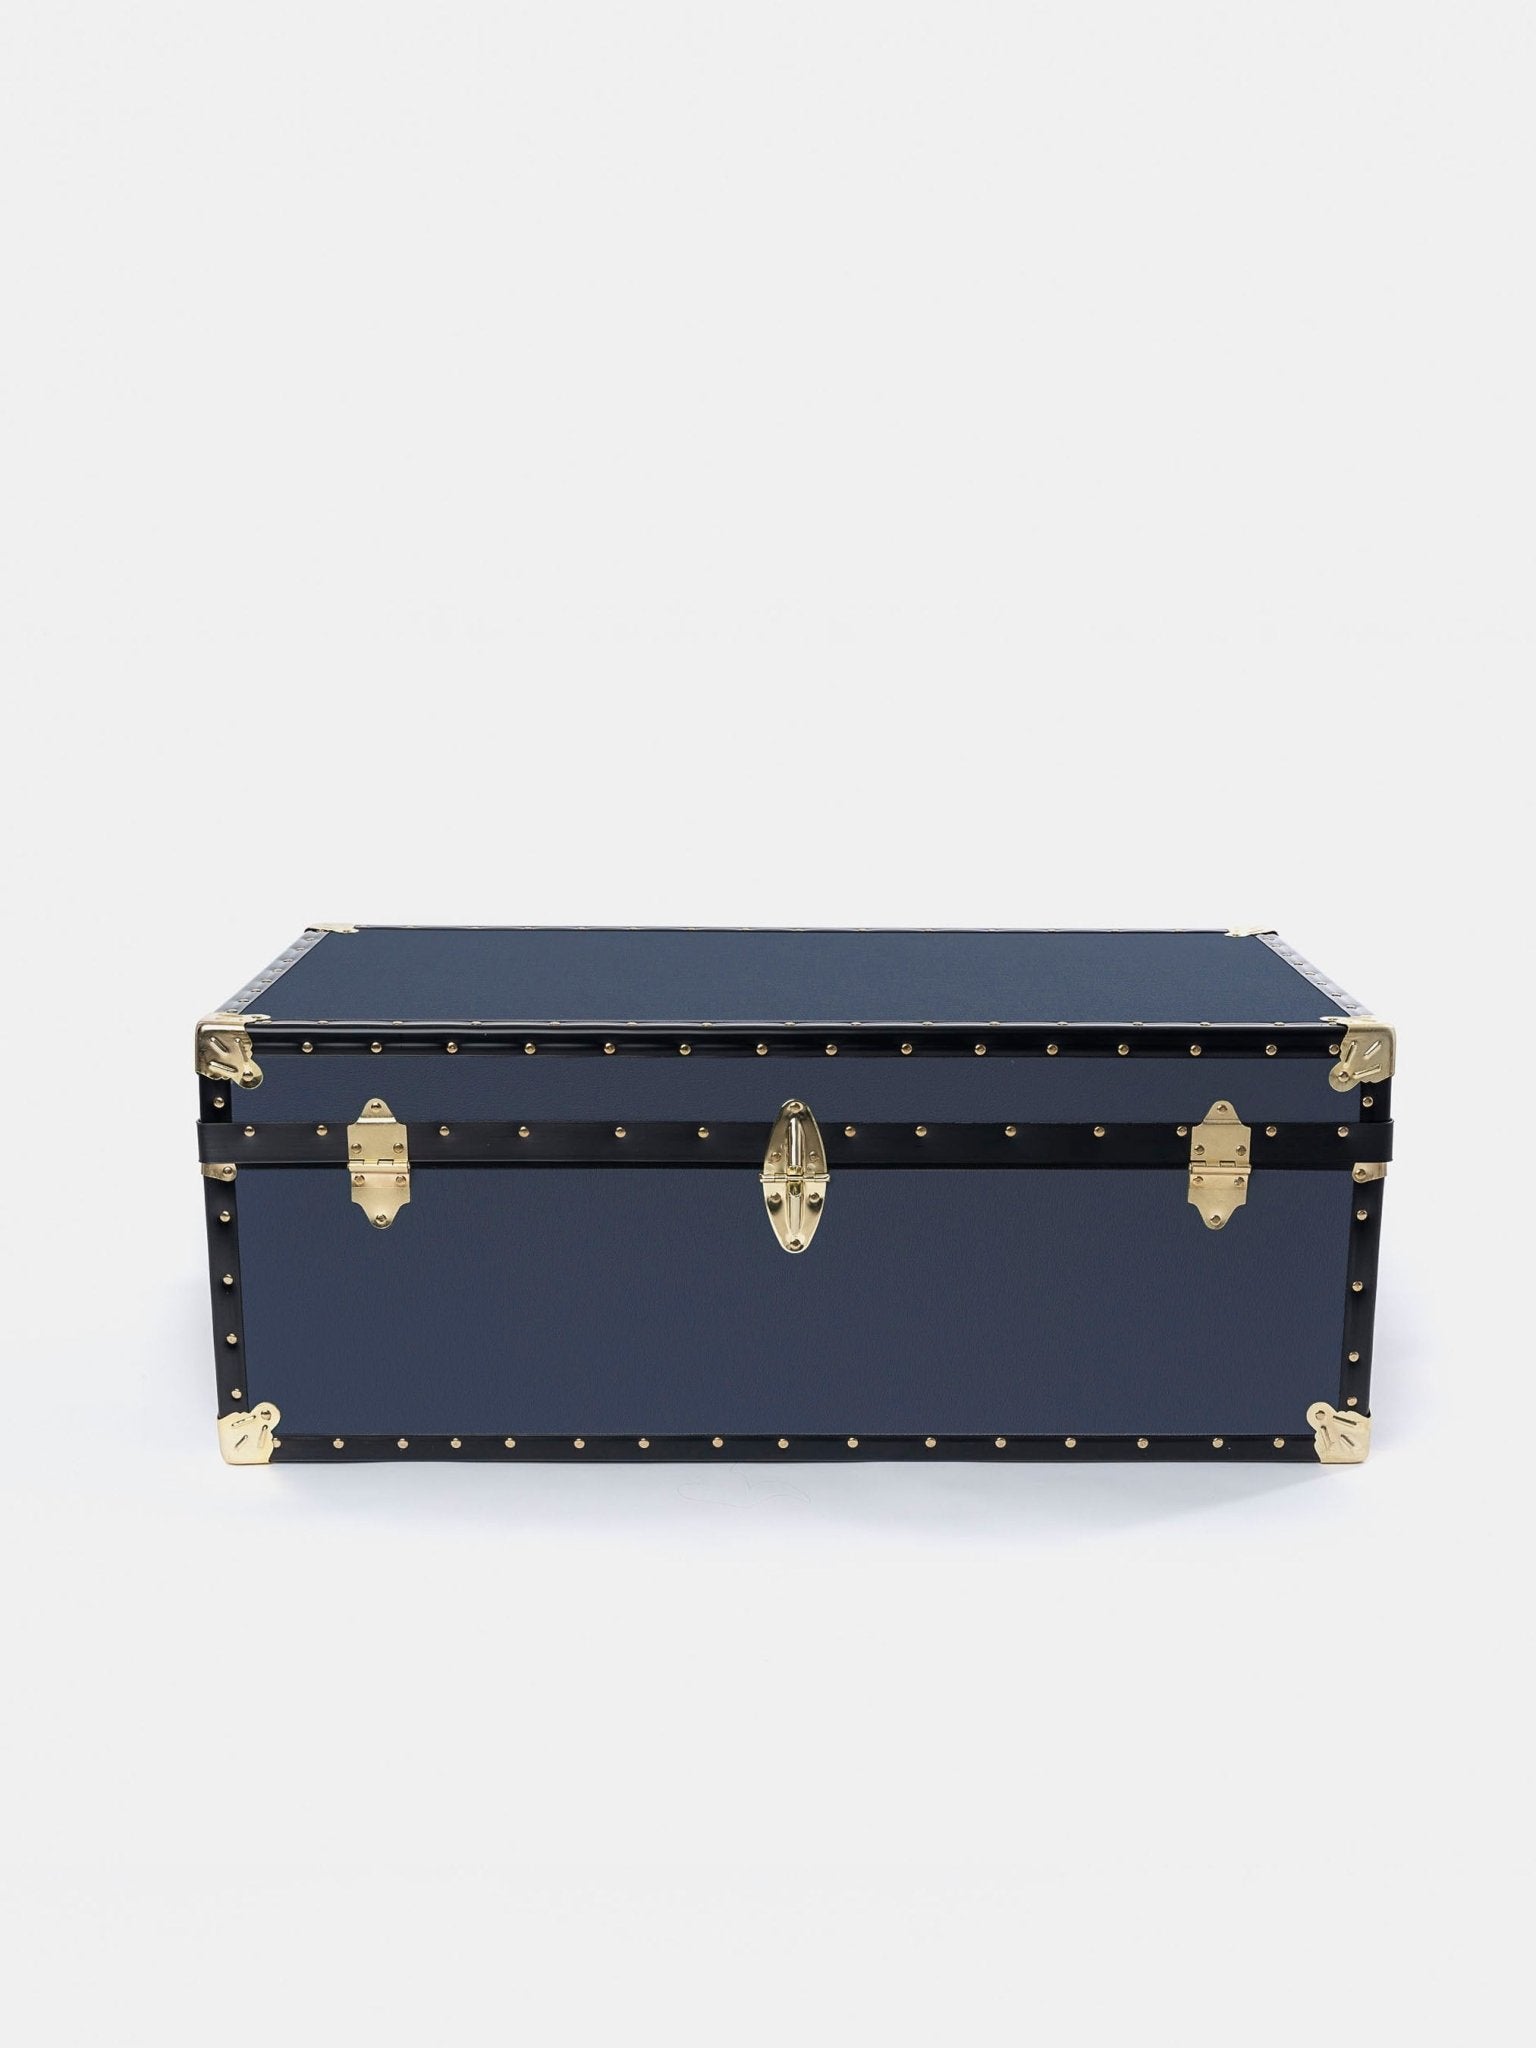 The Steamer Trunk - Navy - The Cambridge Satchel Company UK Store